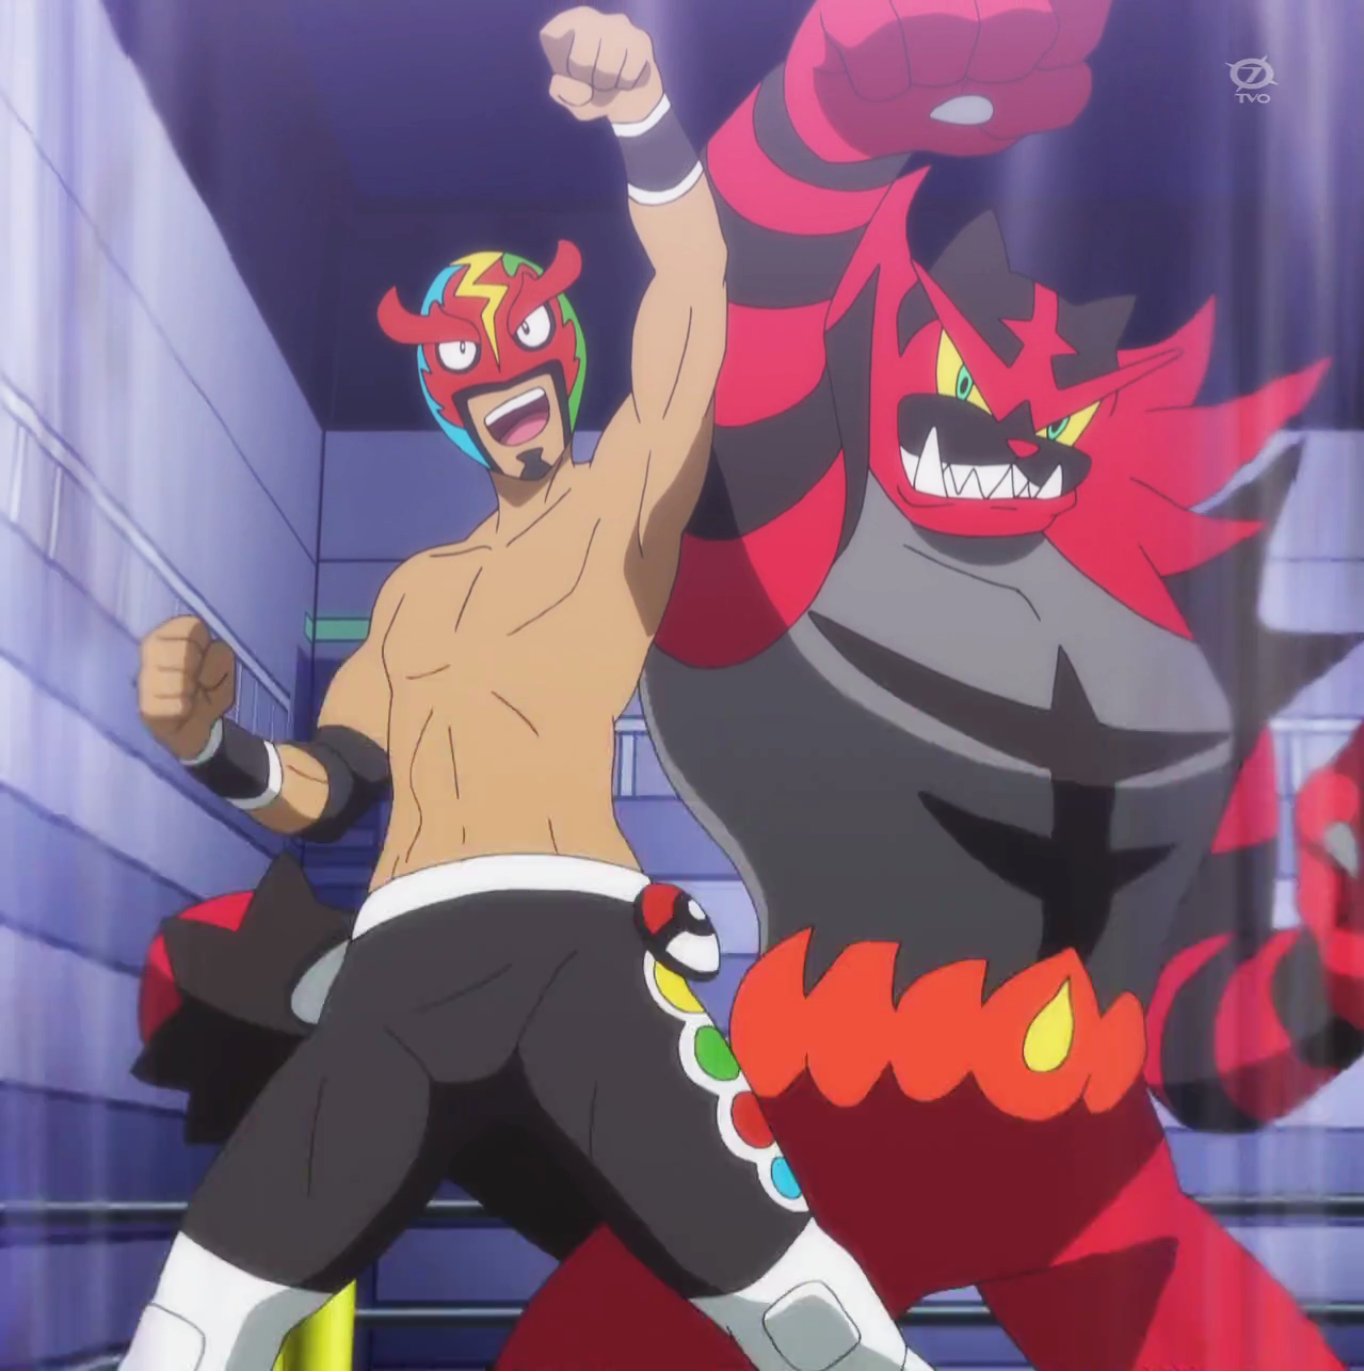 Royal and his Incineroar by WillDinoMaster55